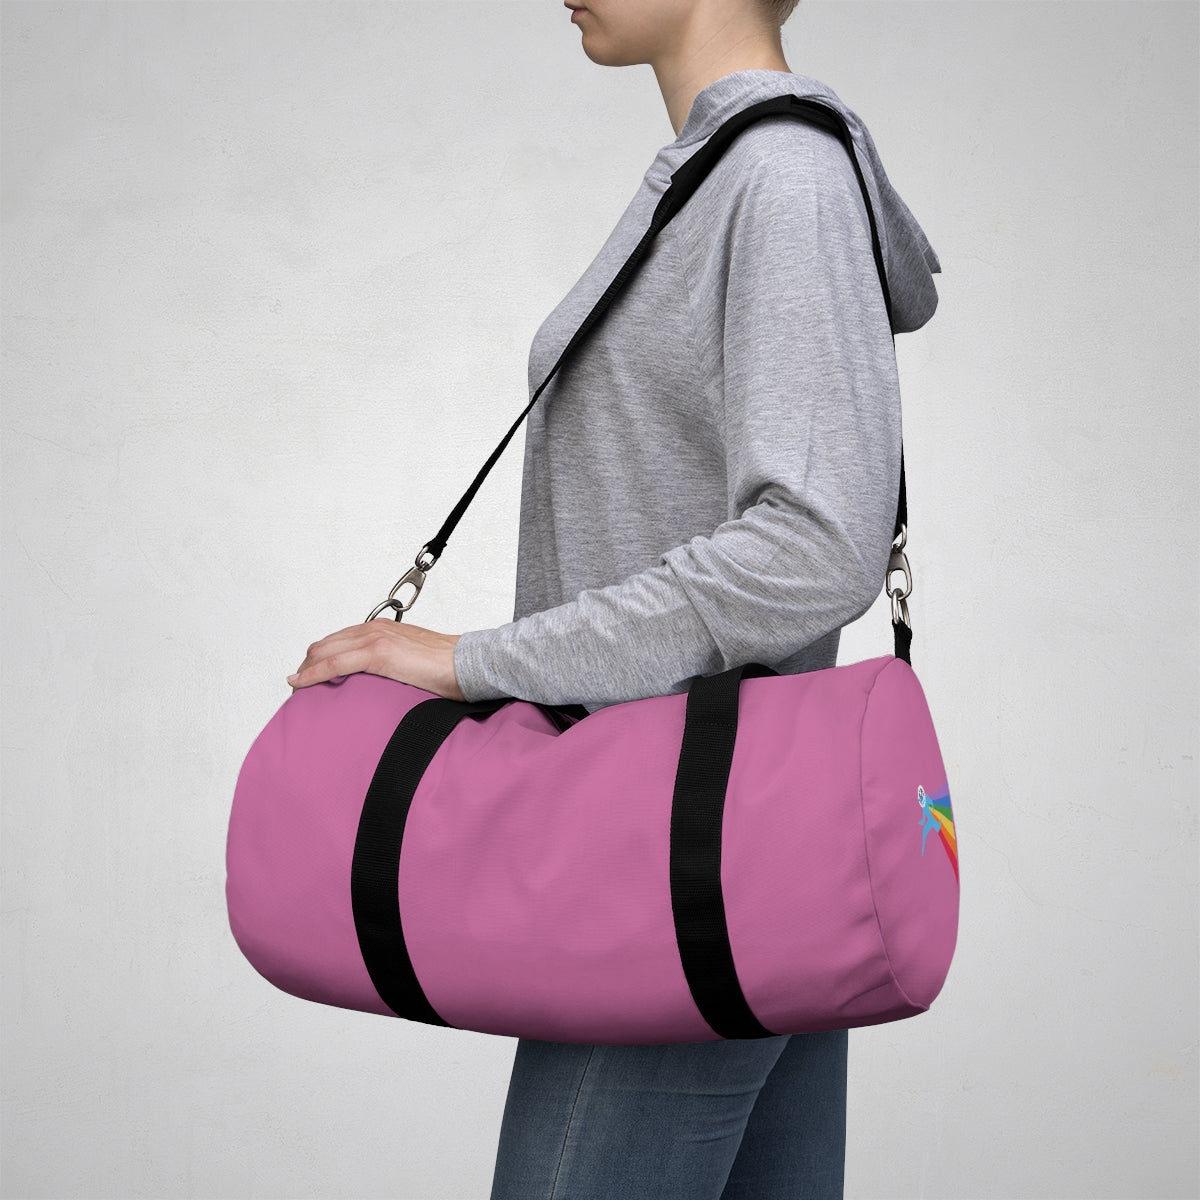 Pride Collection Duffle bag